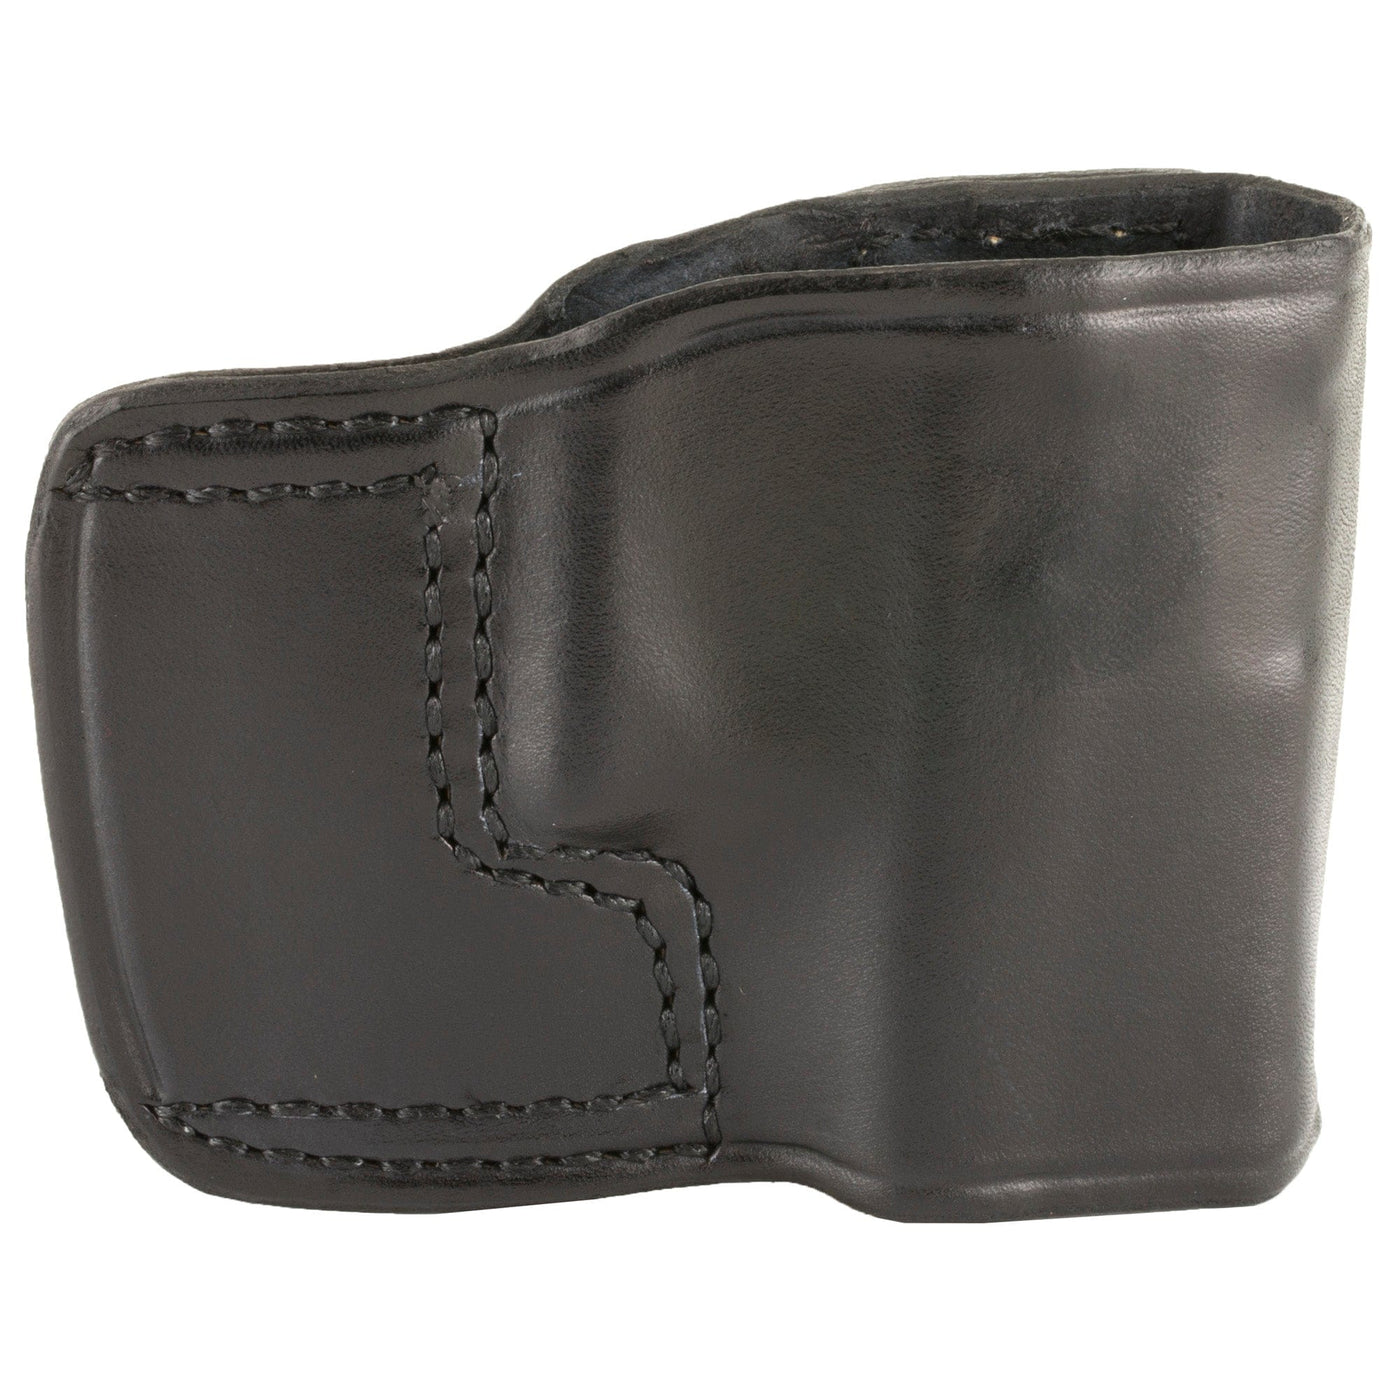 Don Hume D Hume Jit For Glk 43/43x Blk Rh Holsters